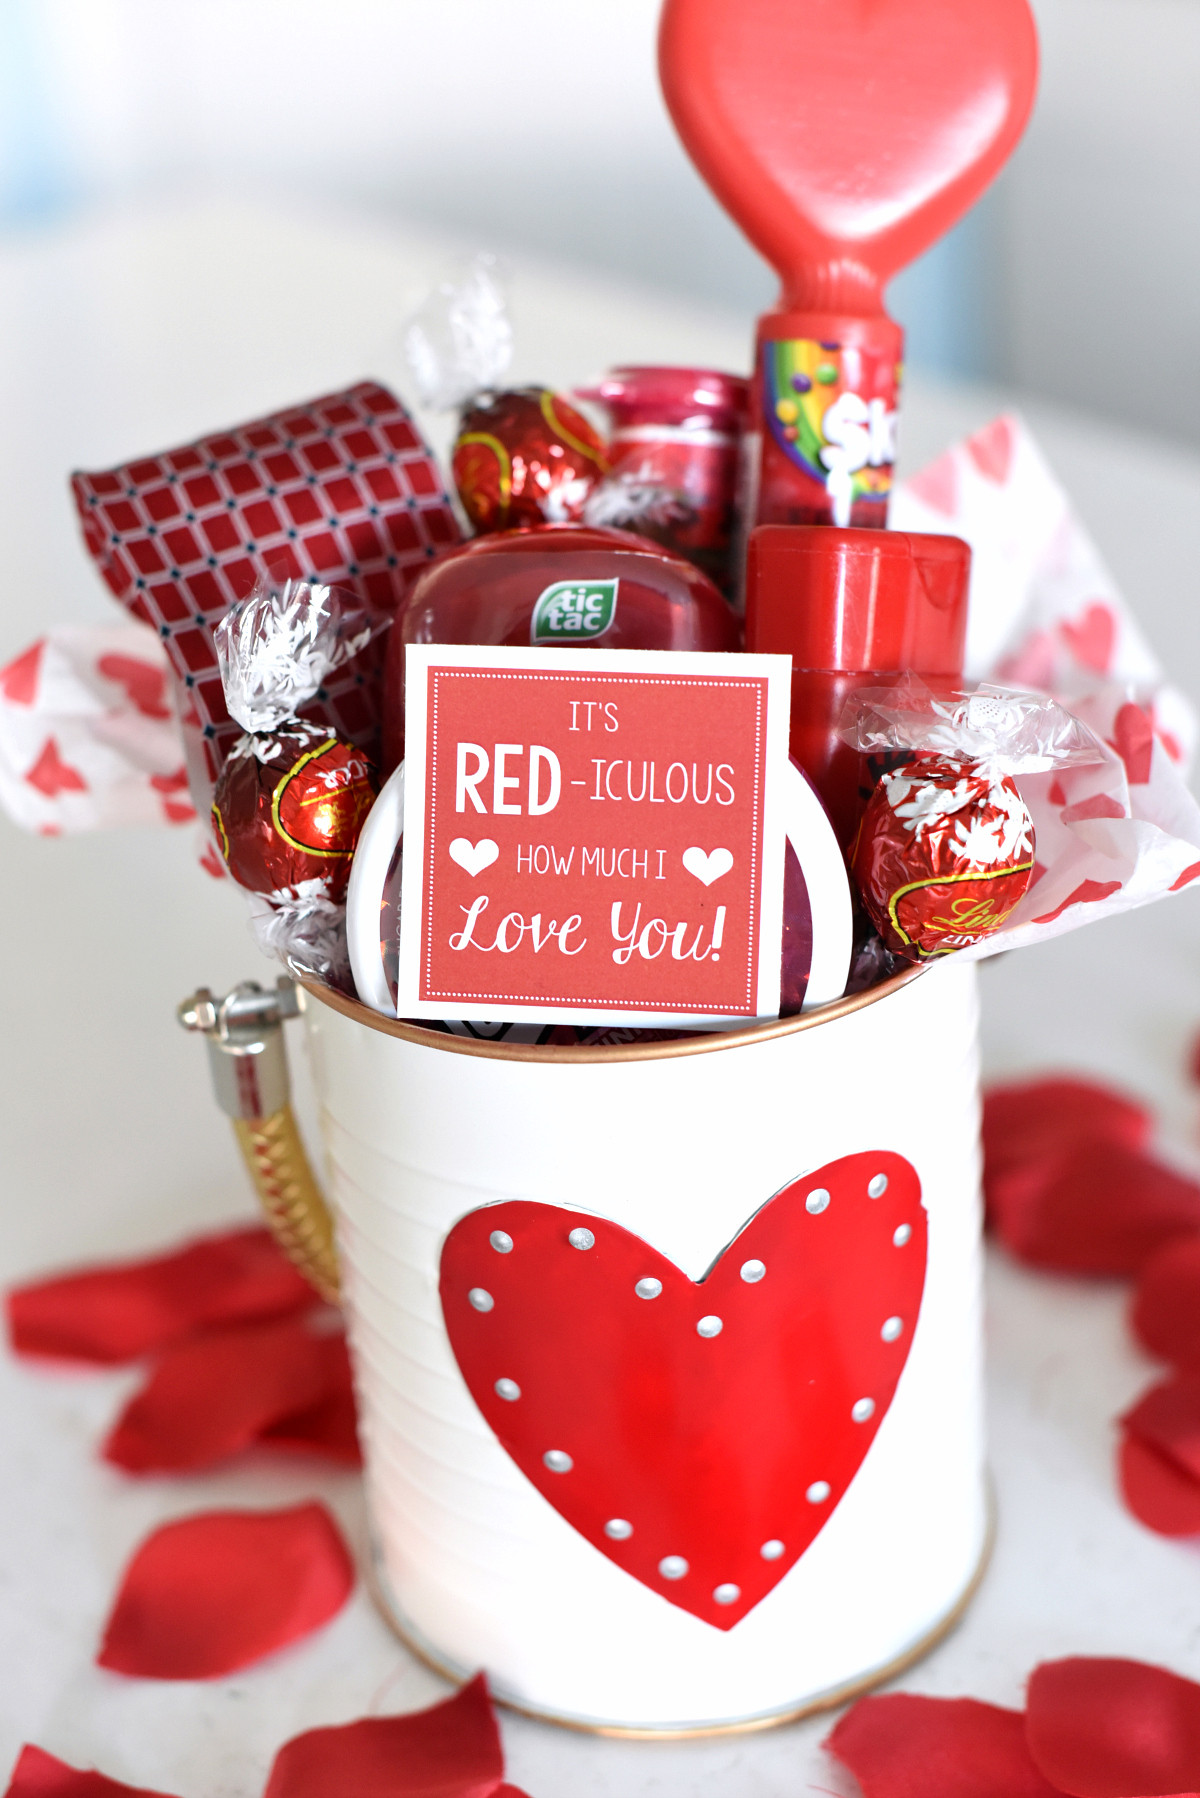 Valentines Day Gifts for Teens Elegant 25 Diy Valentine S Day Gift Ideas Teens Will Love